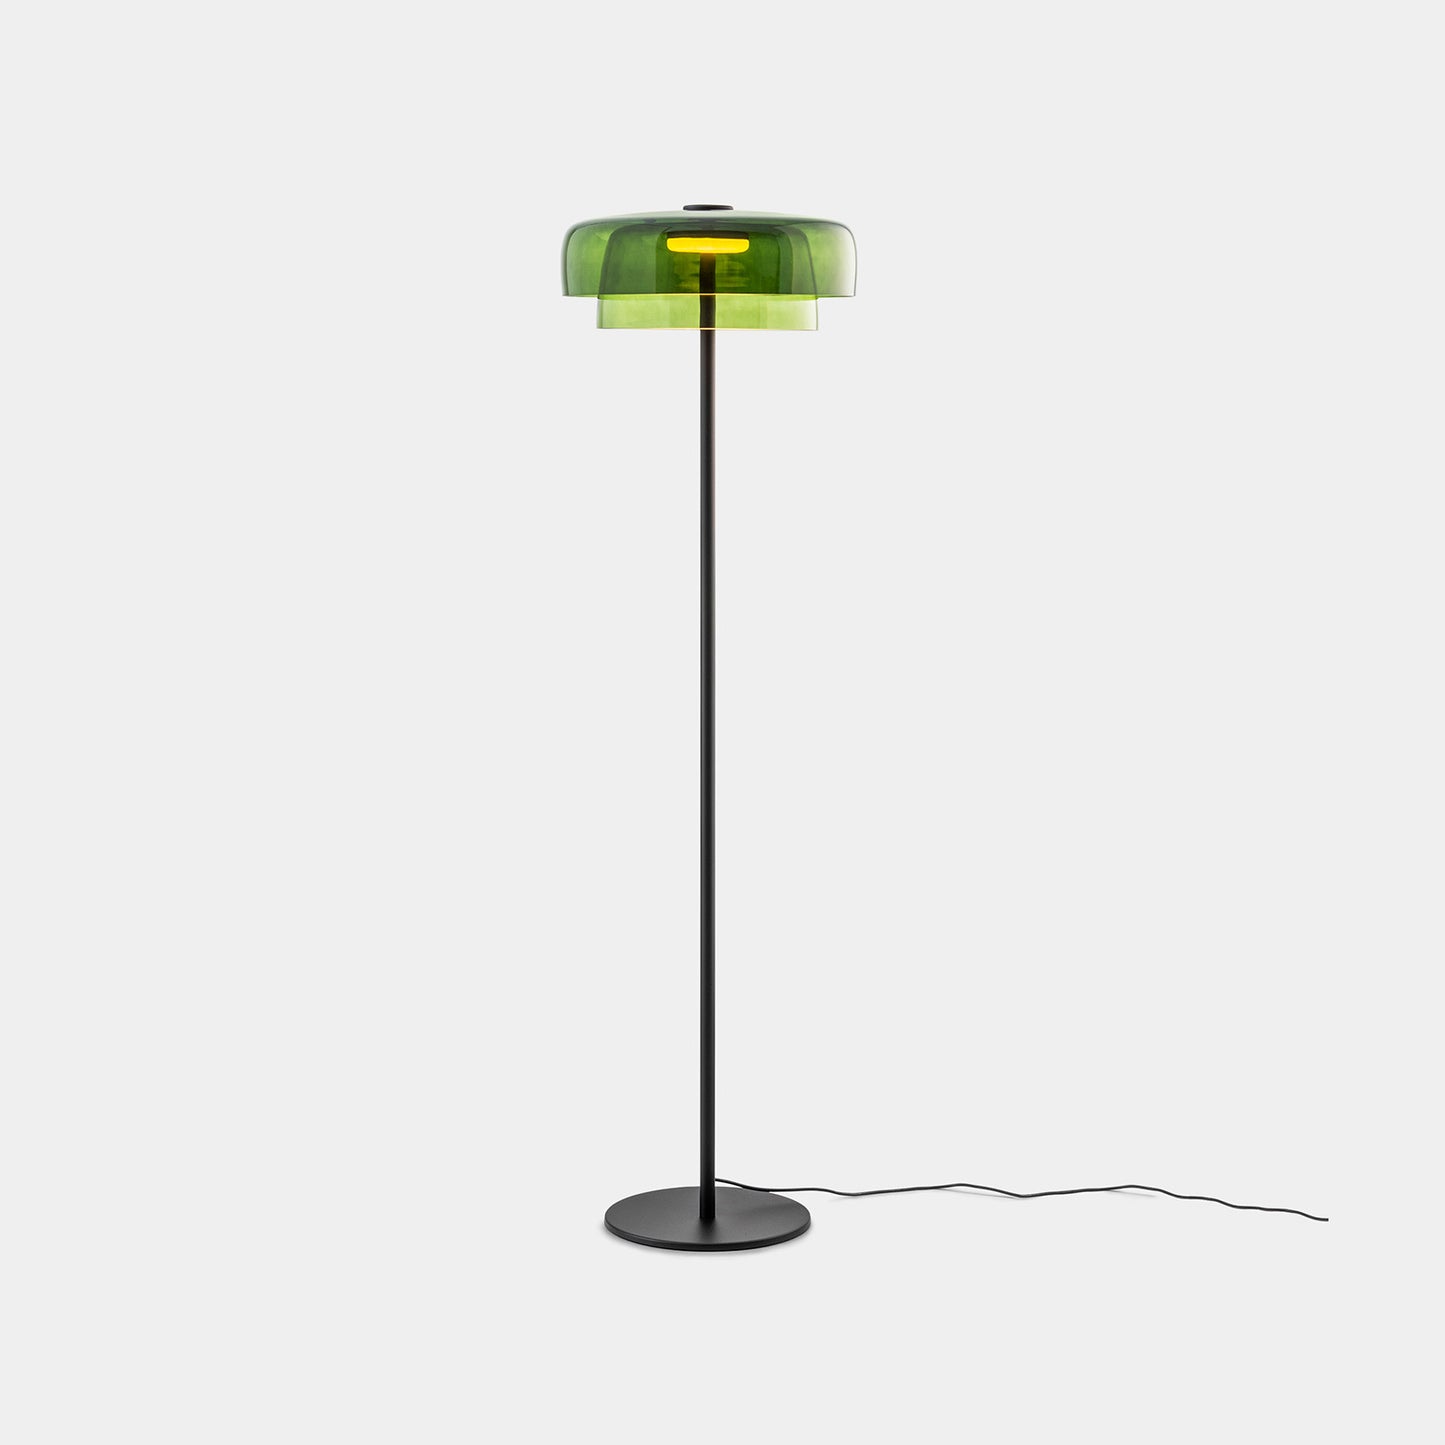 Levels Double-Shaded Floor Lamp